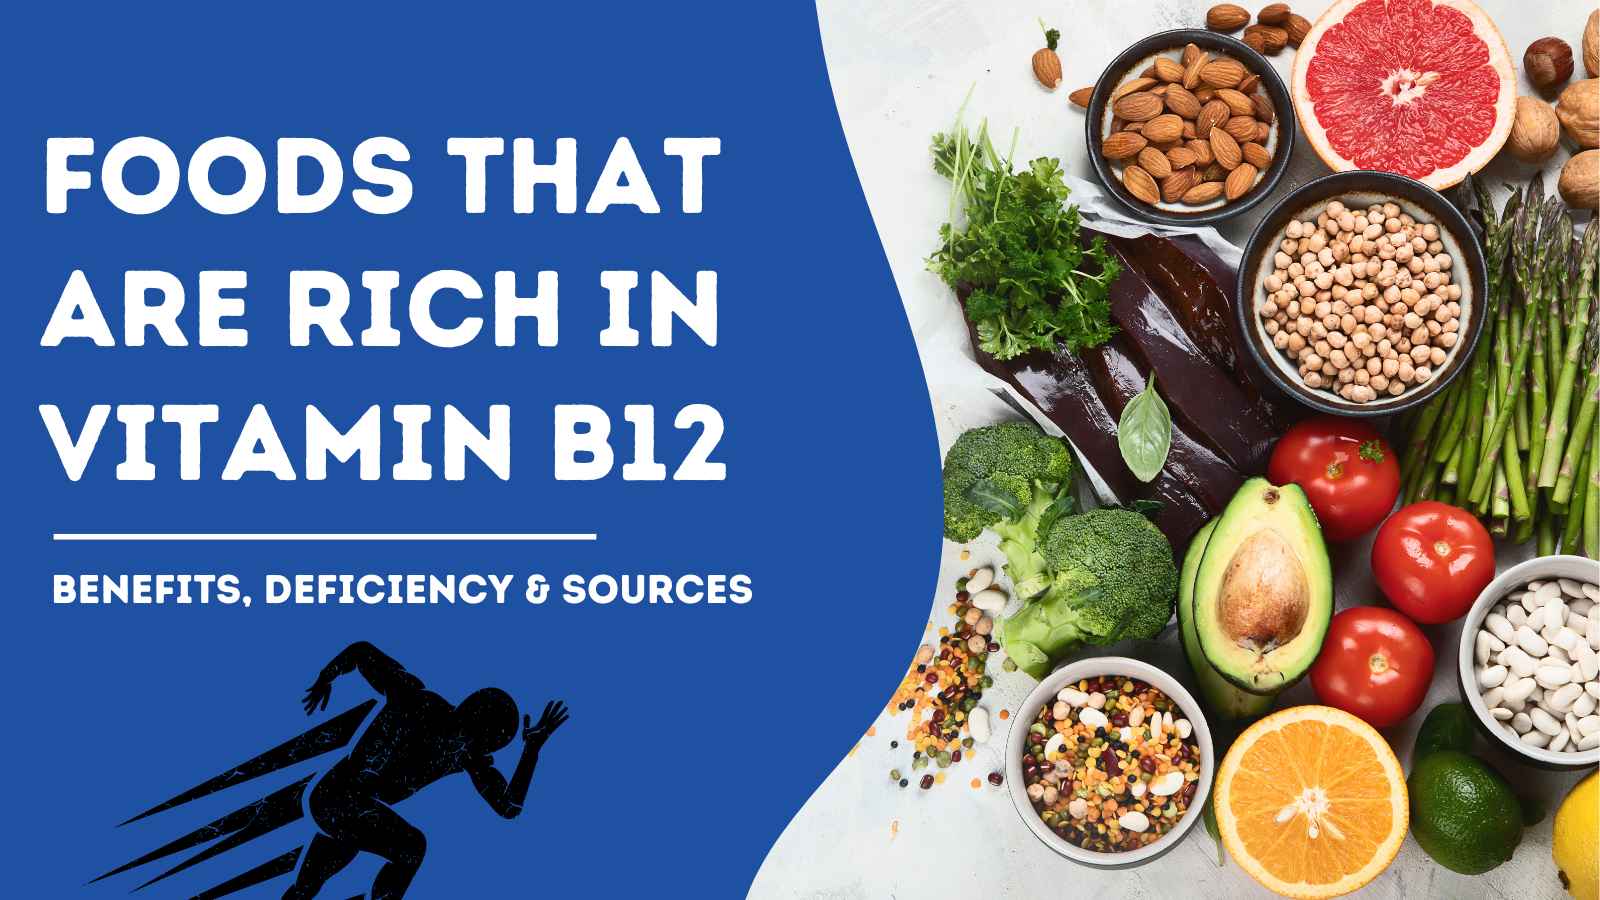 Foods that are rich in vitamin B12 Benefits, Deficiency & Sources